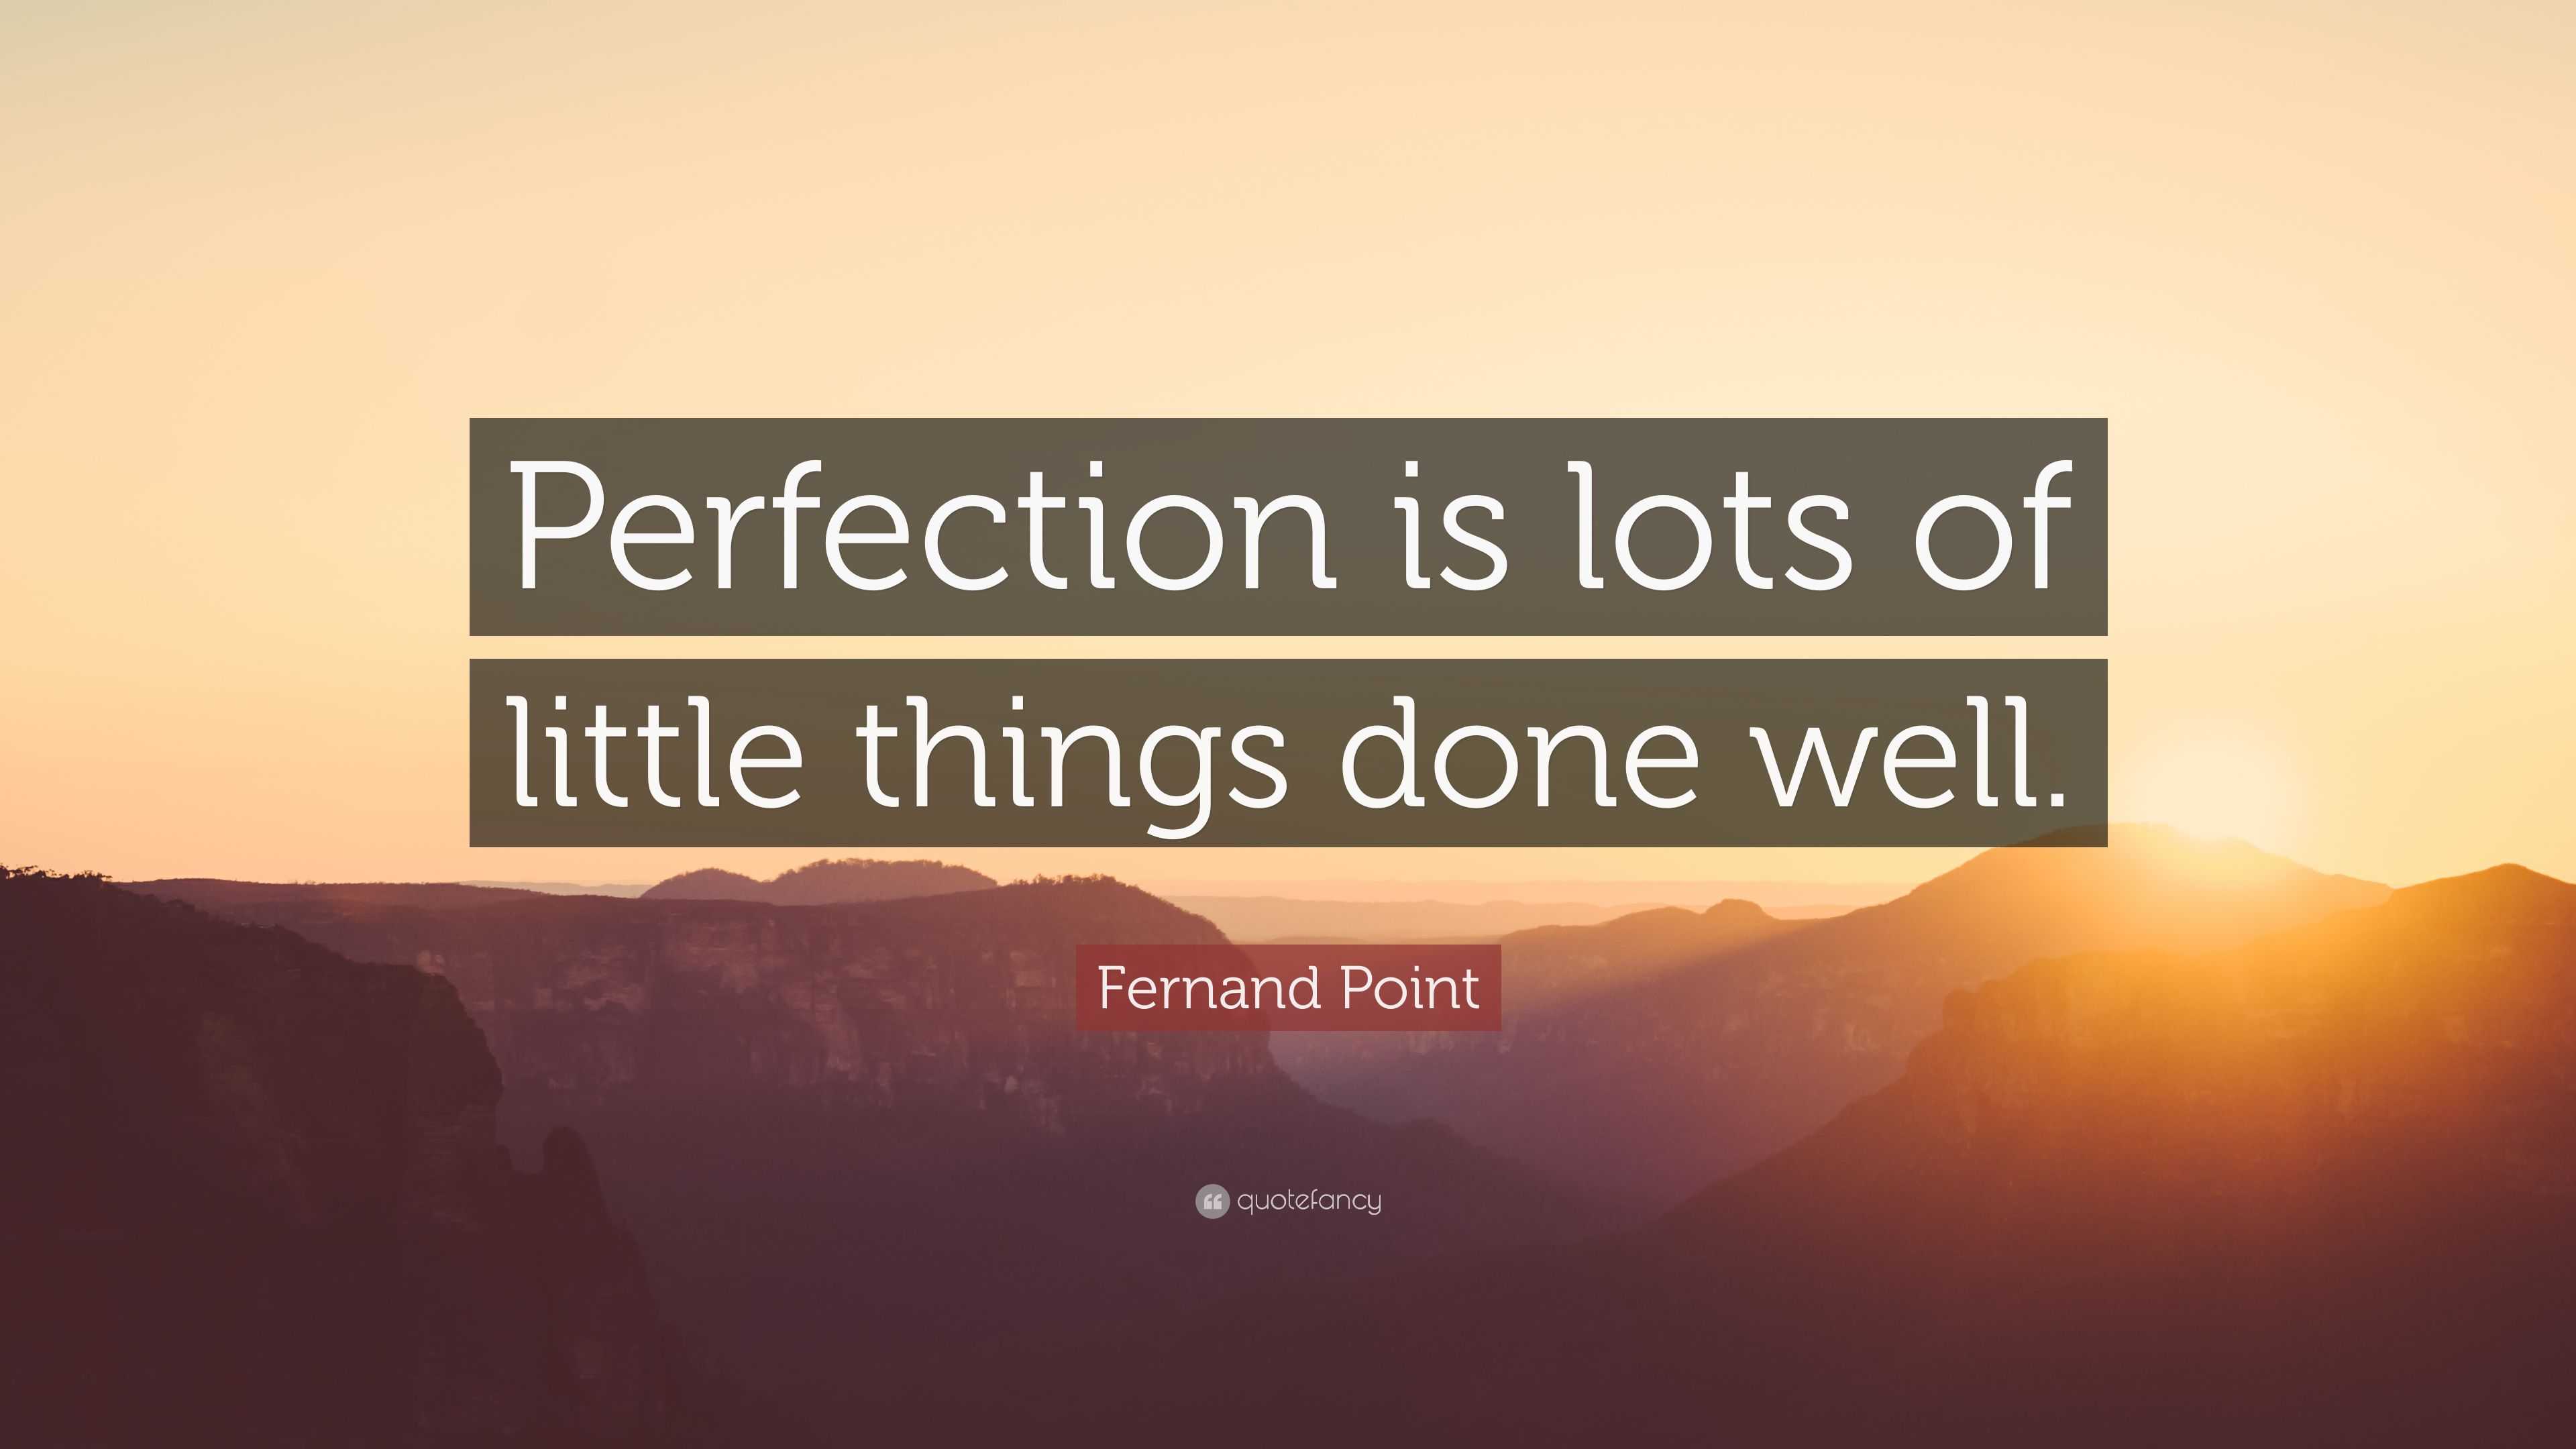 Perfection is lots of little things done well. 